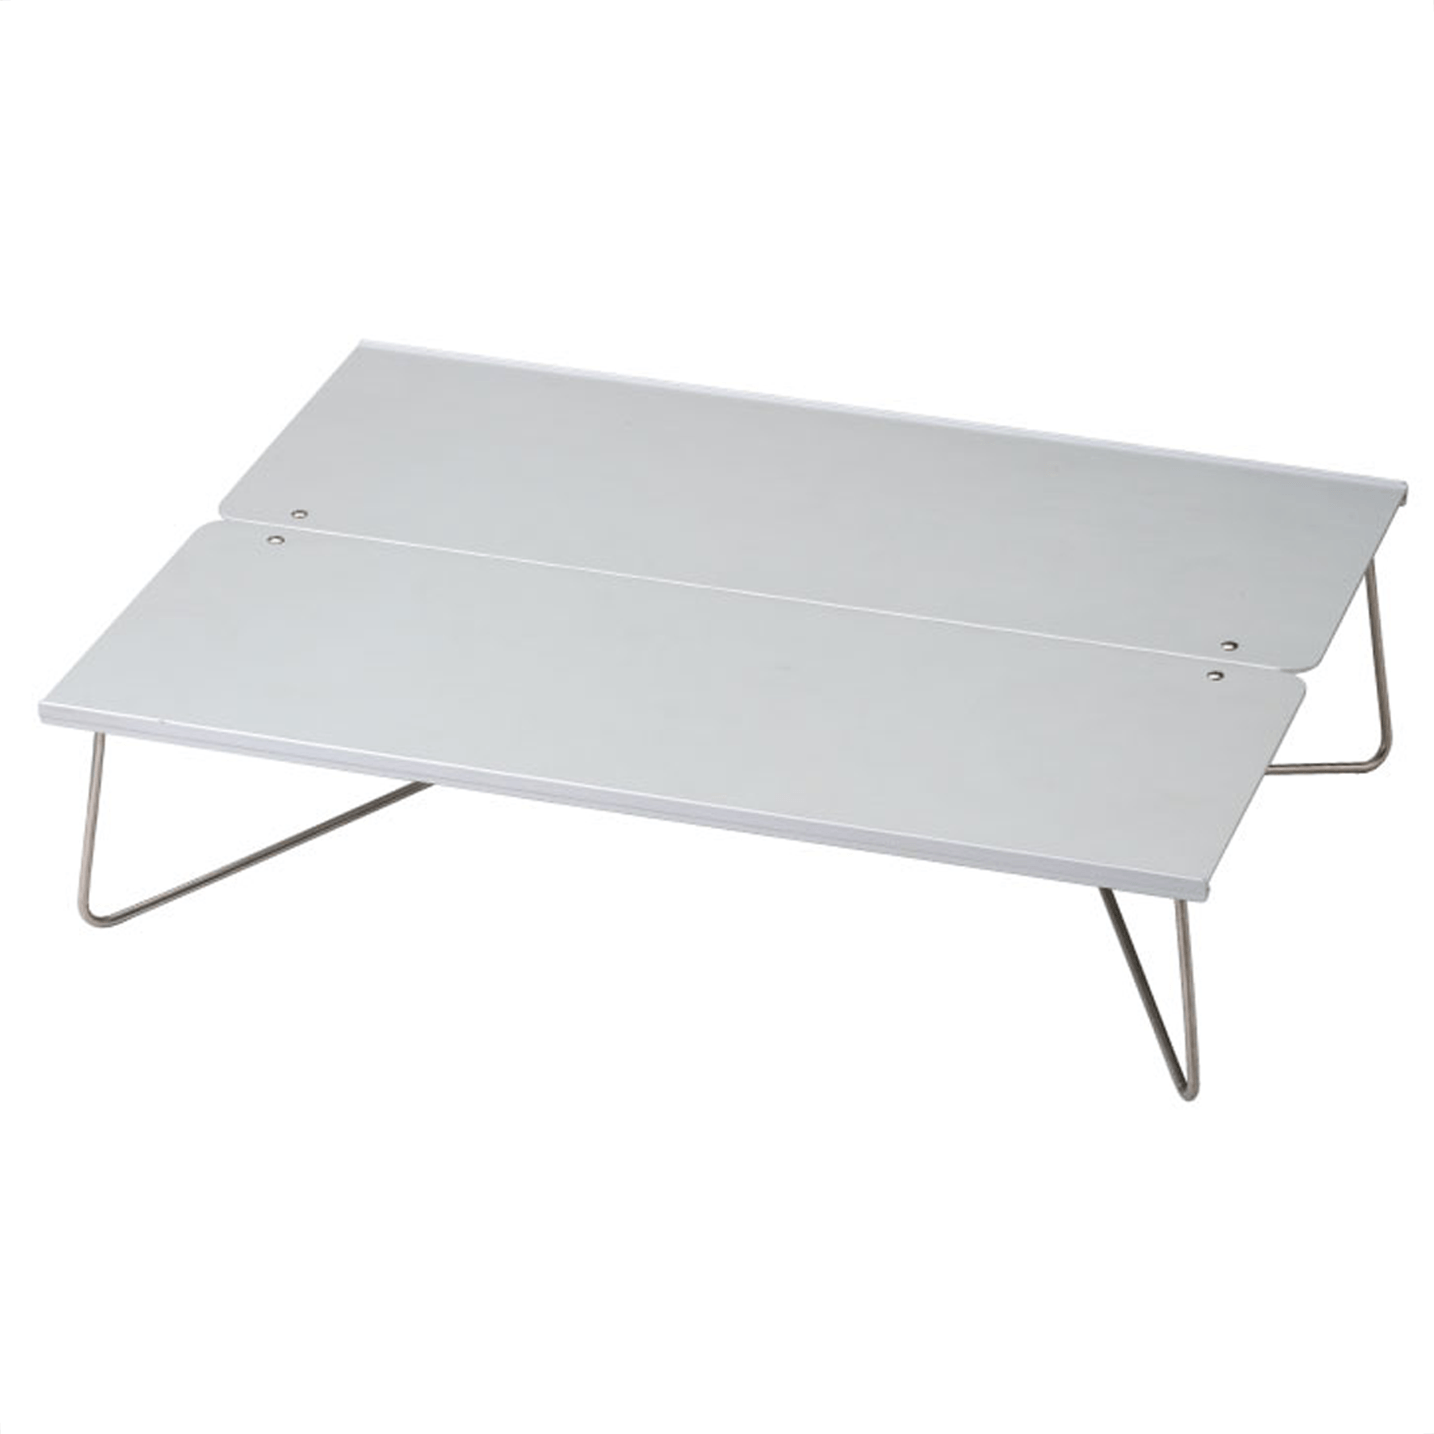 SOTO Field Hopper Large Pop Up Table